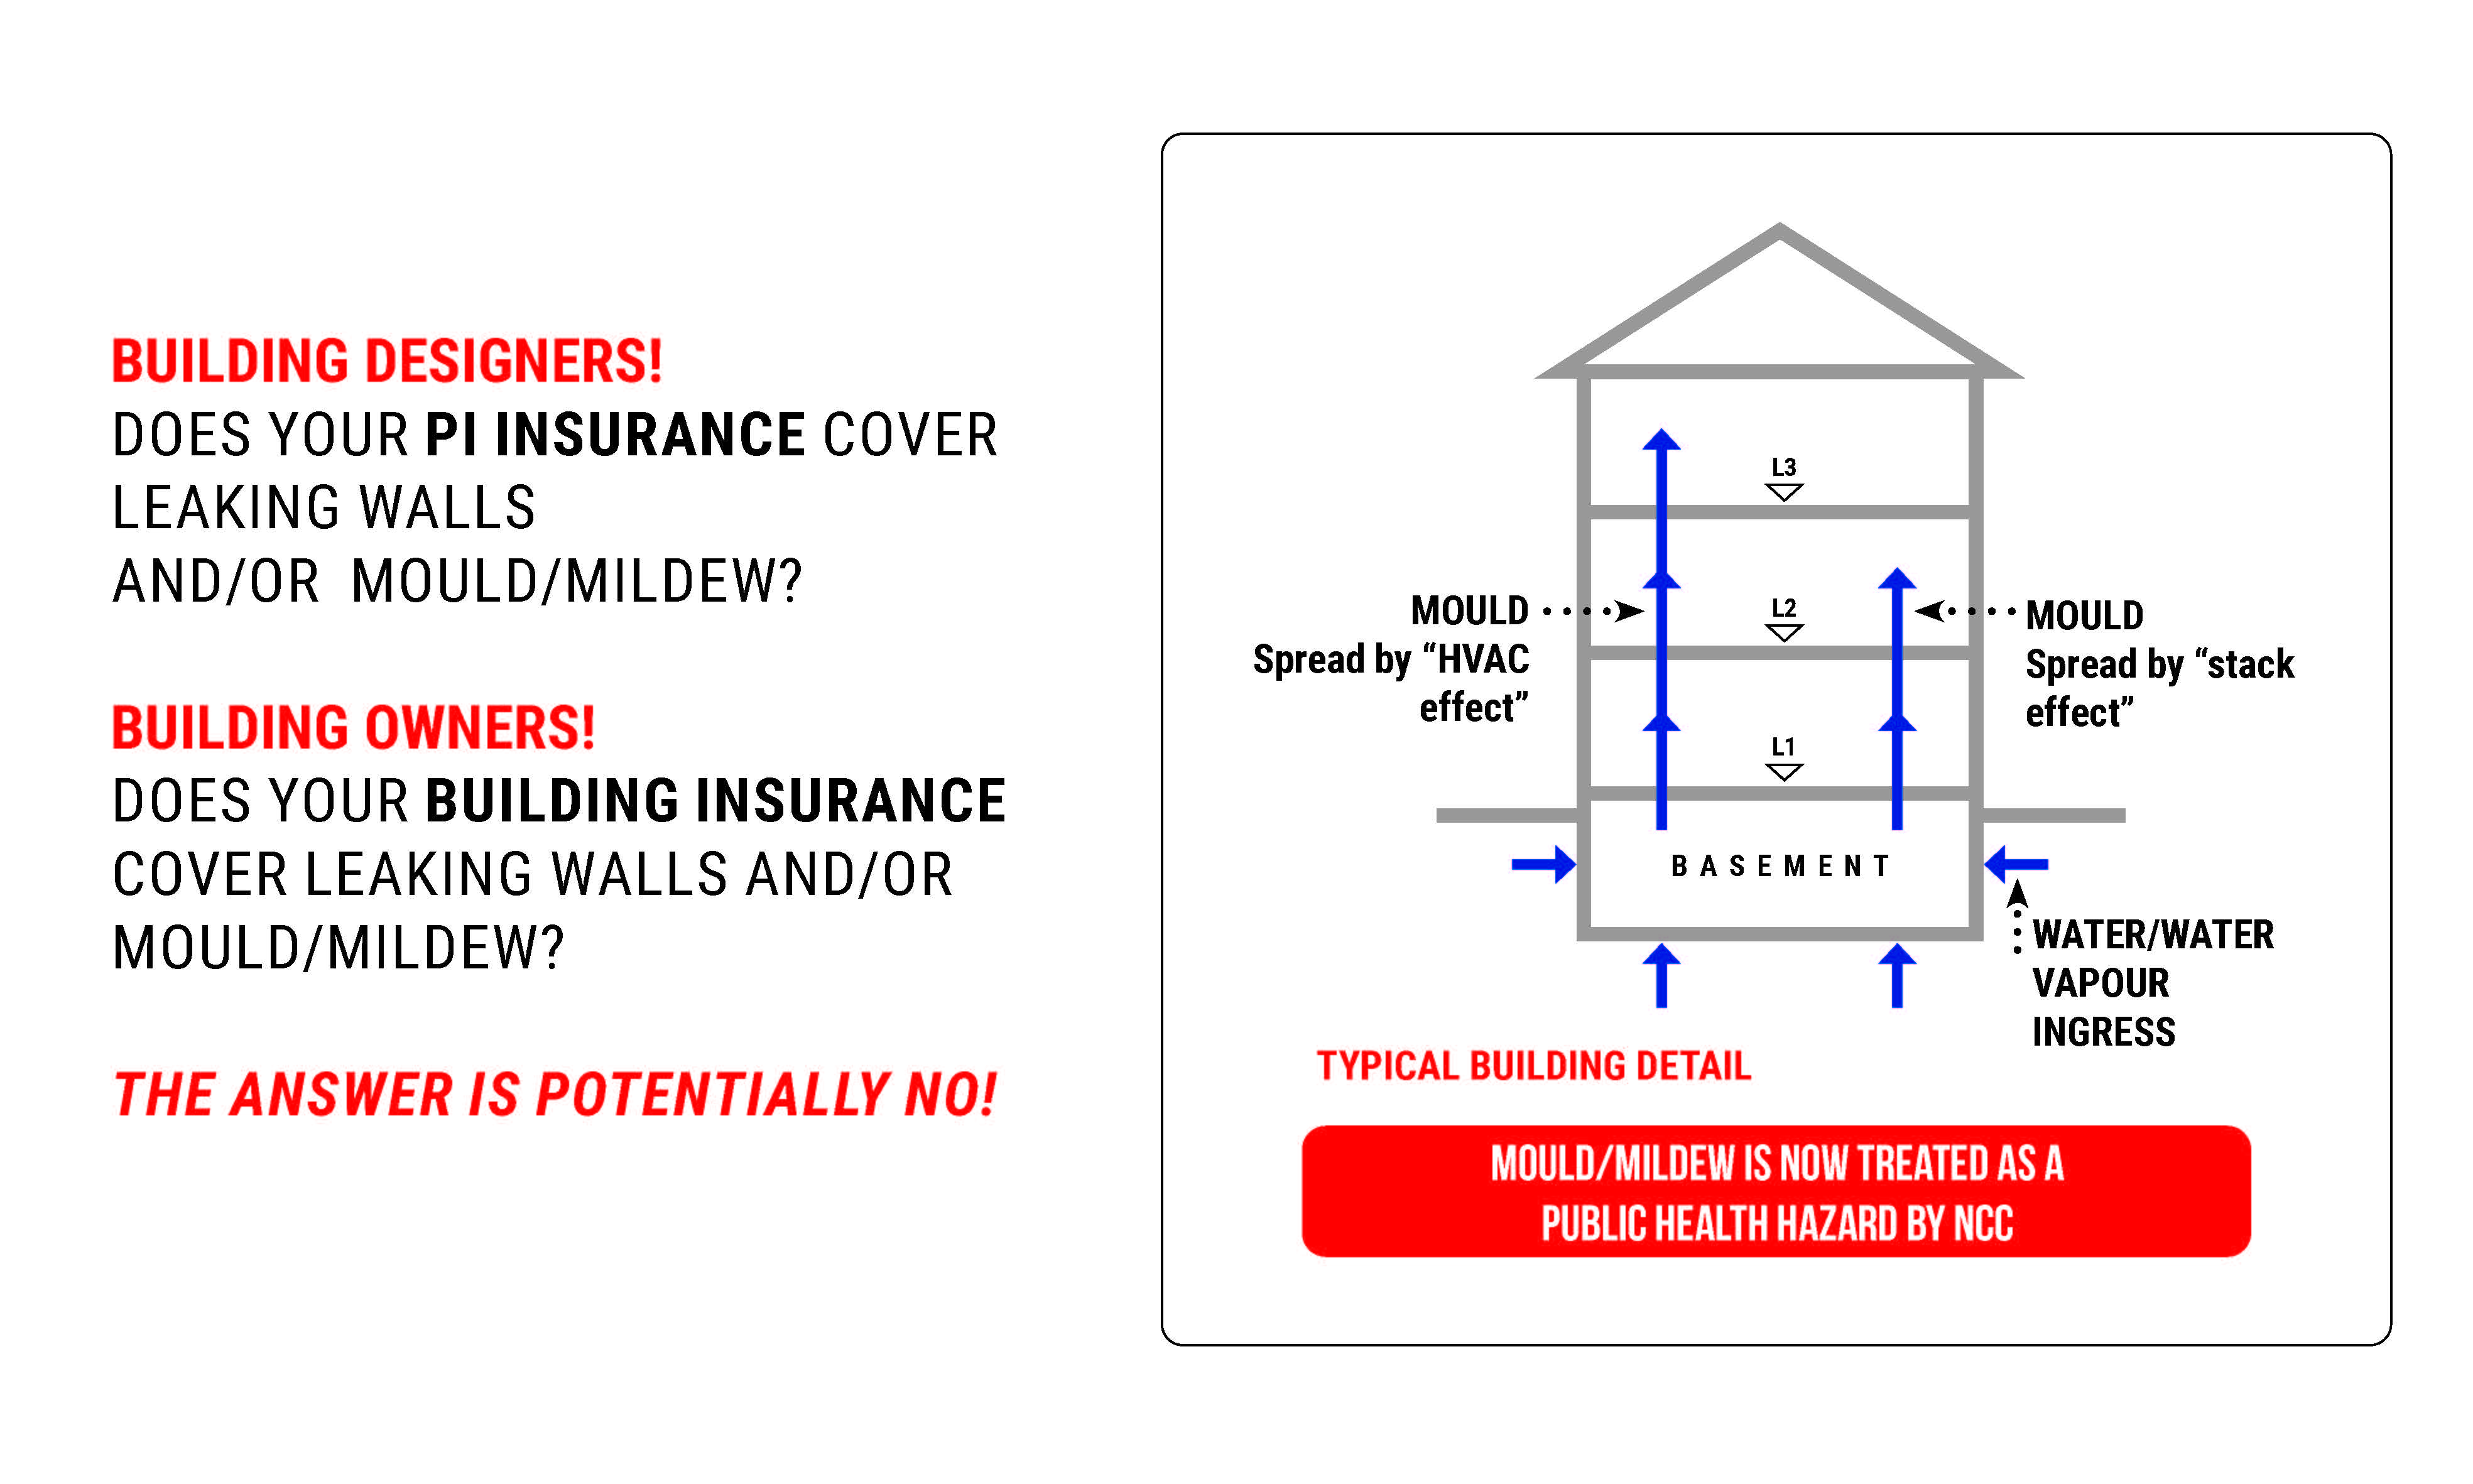 Does Your Insurance Cover Leaking Walls And/Or Mould/Mildew?